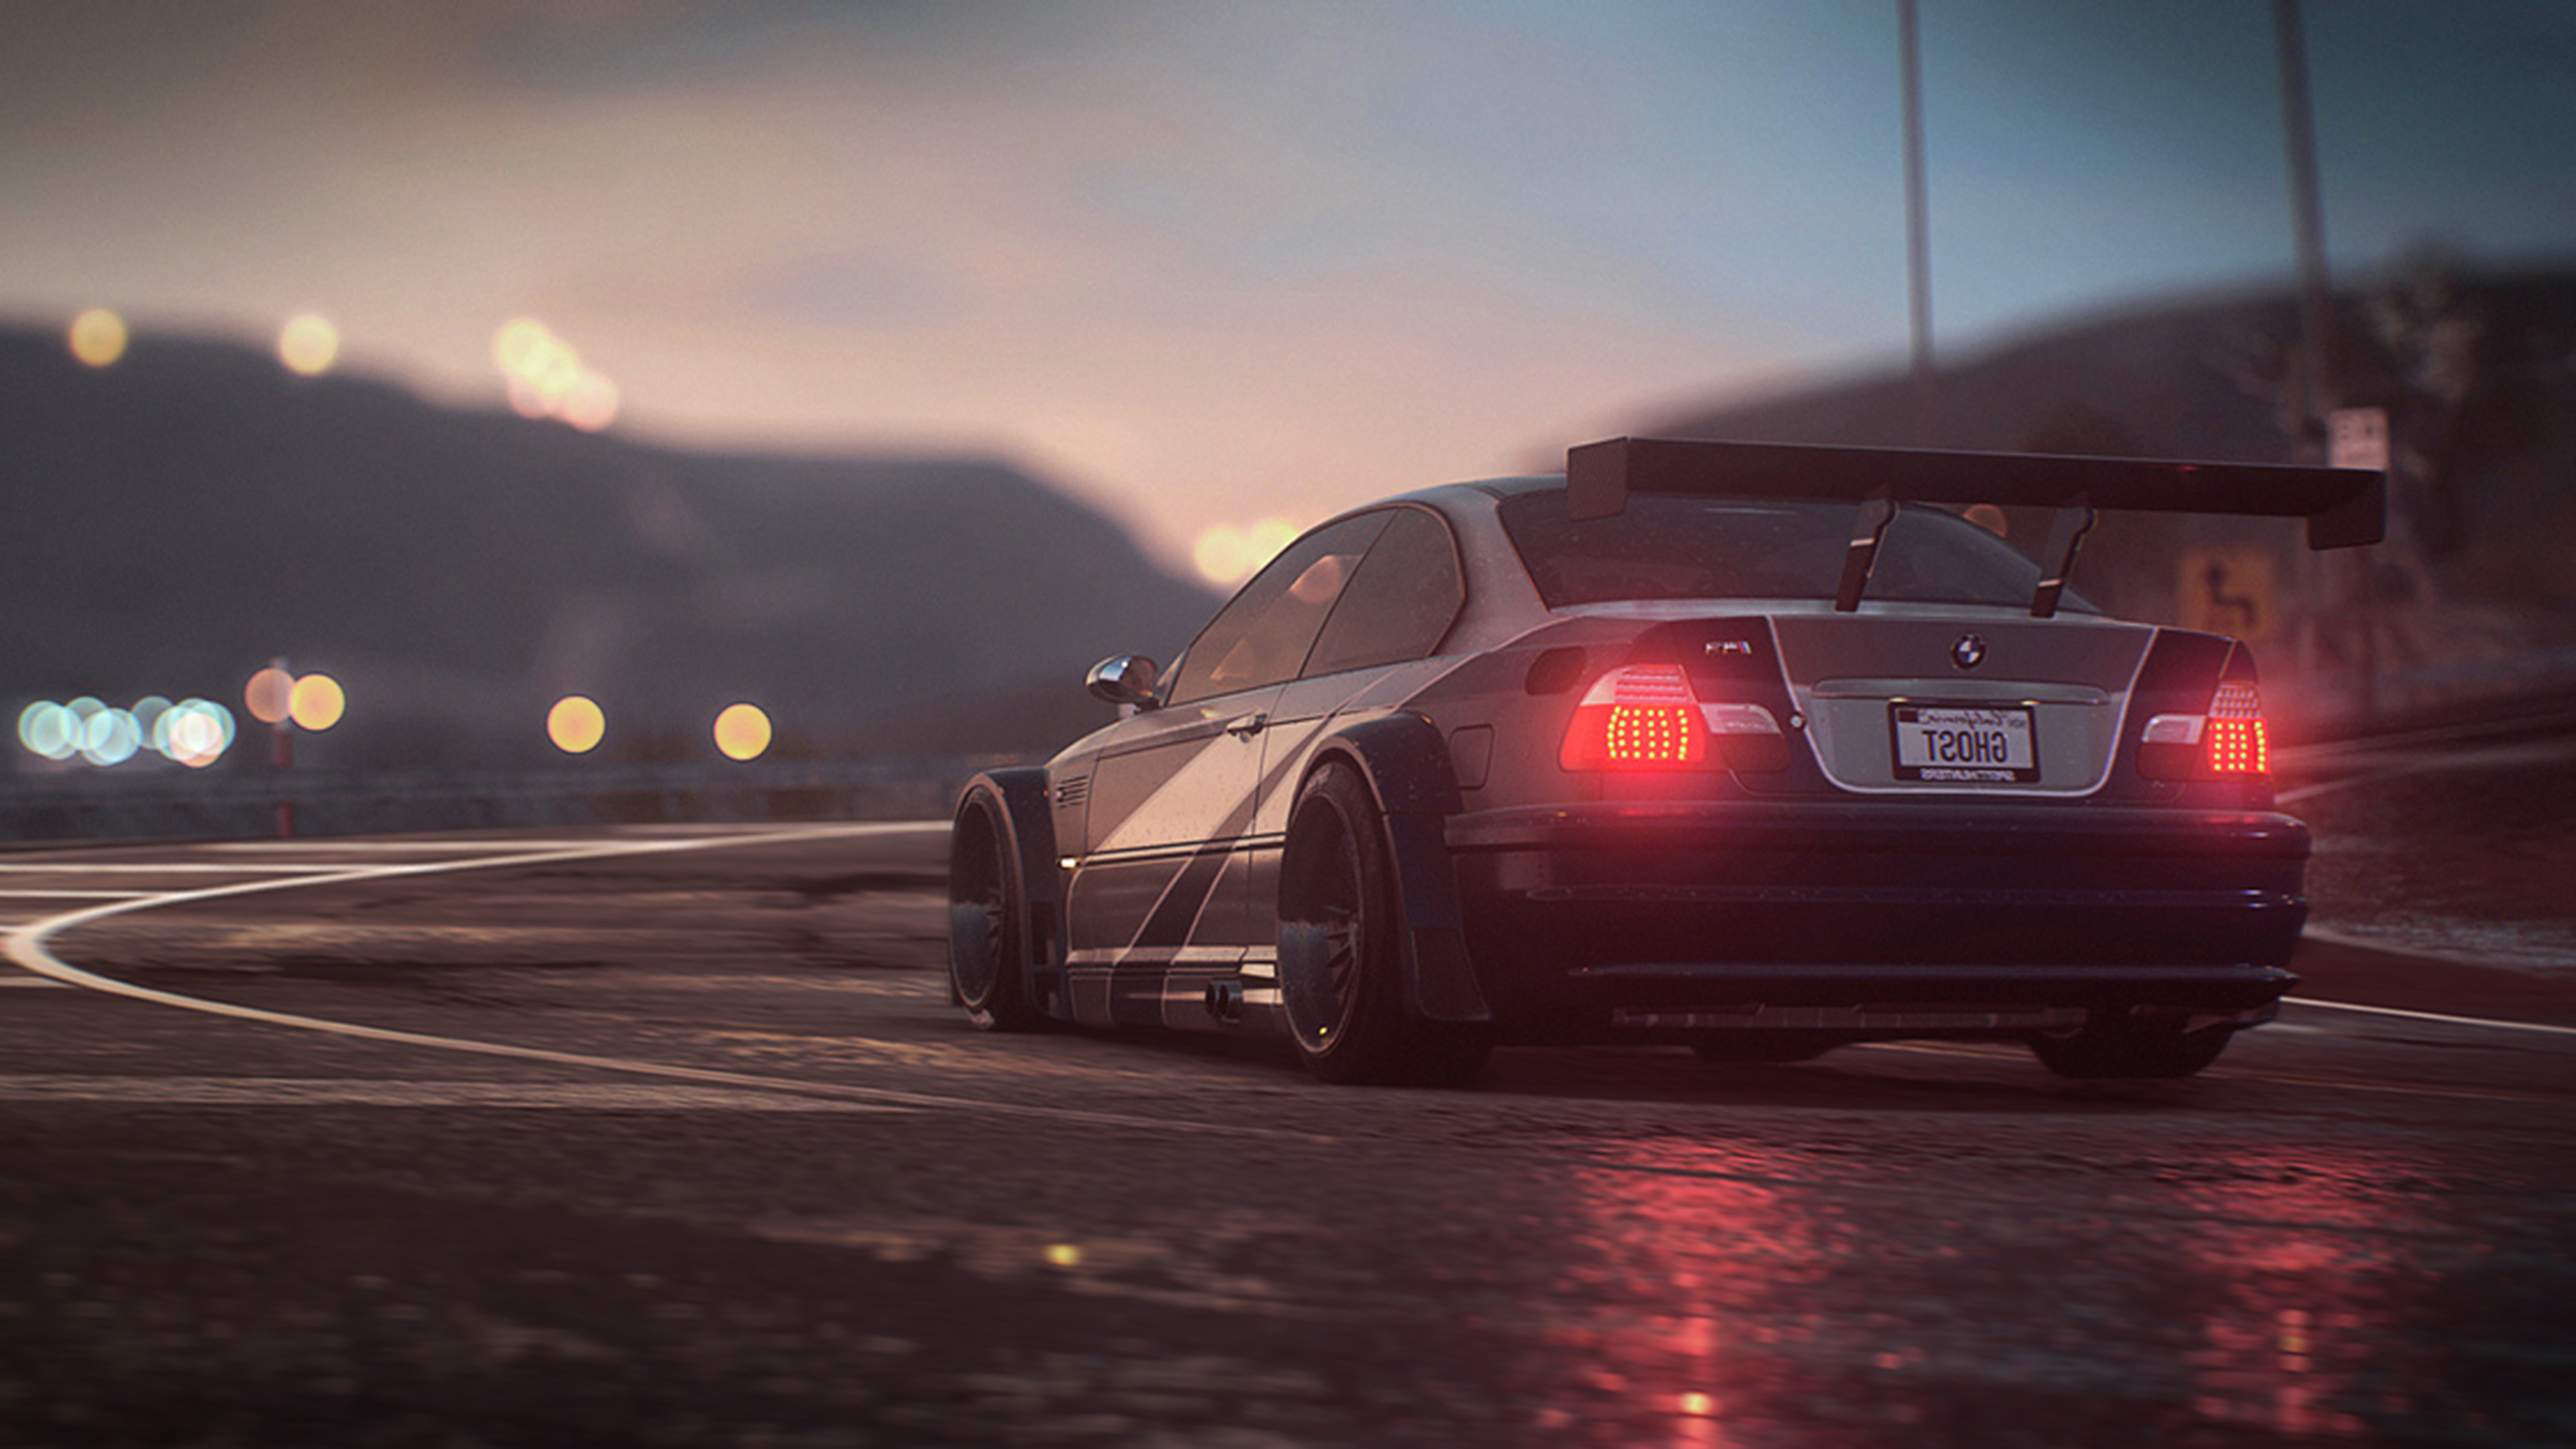 Beautiful Need For Speed Wallpaper Full HD Pictures